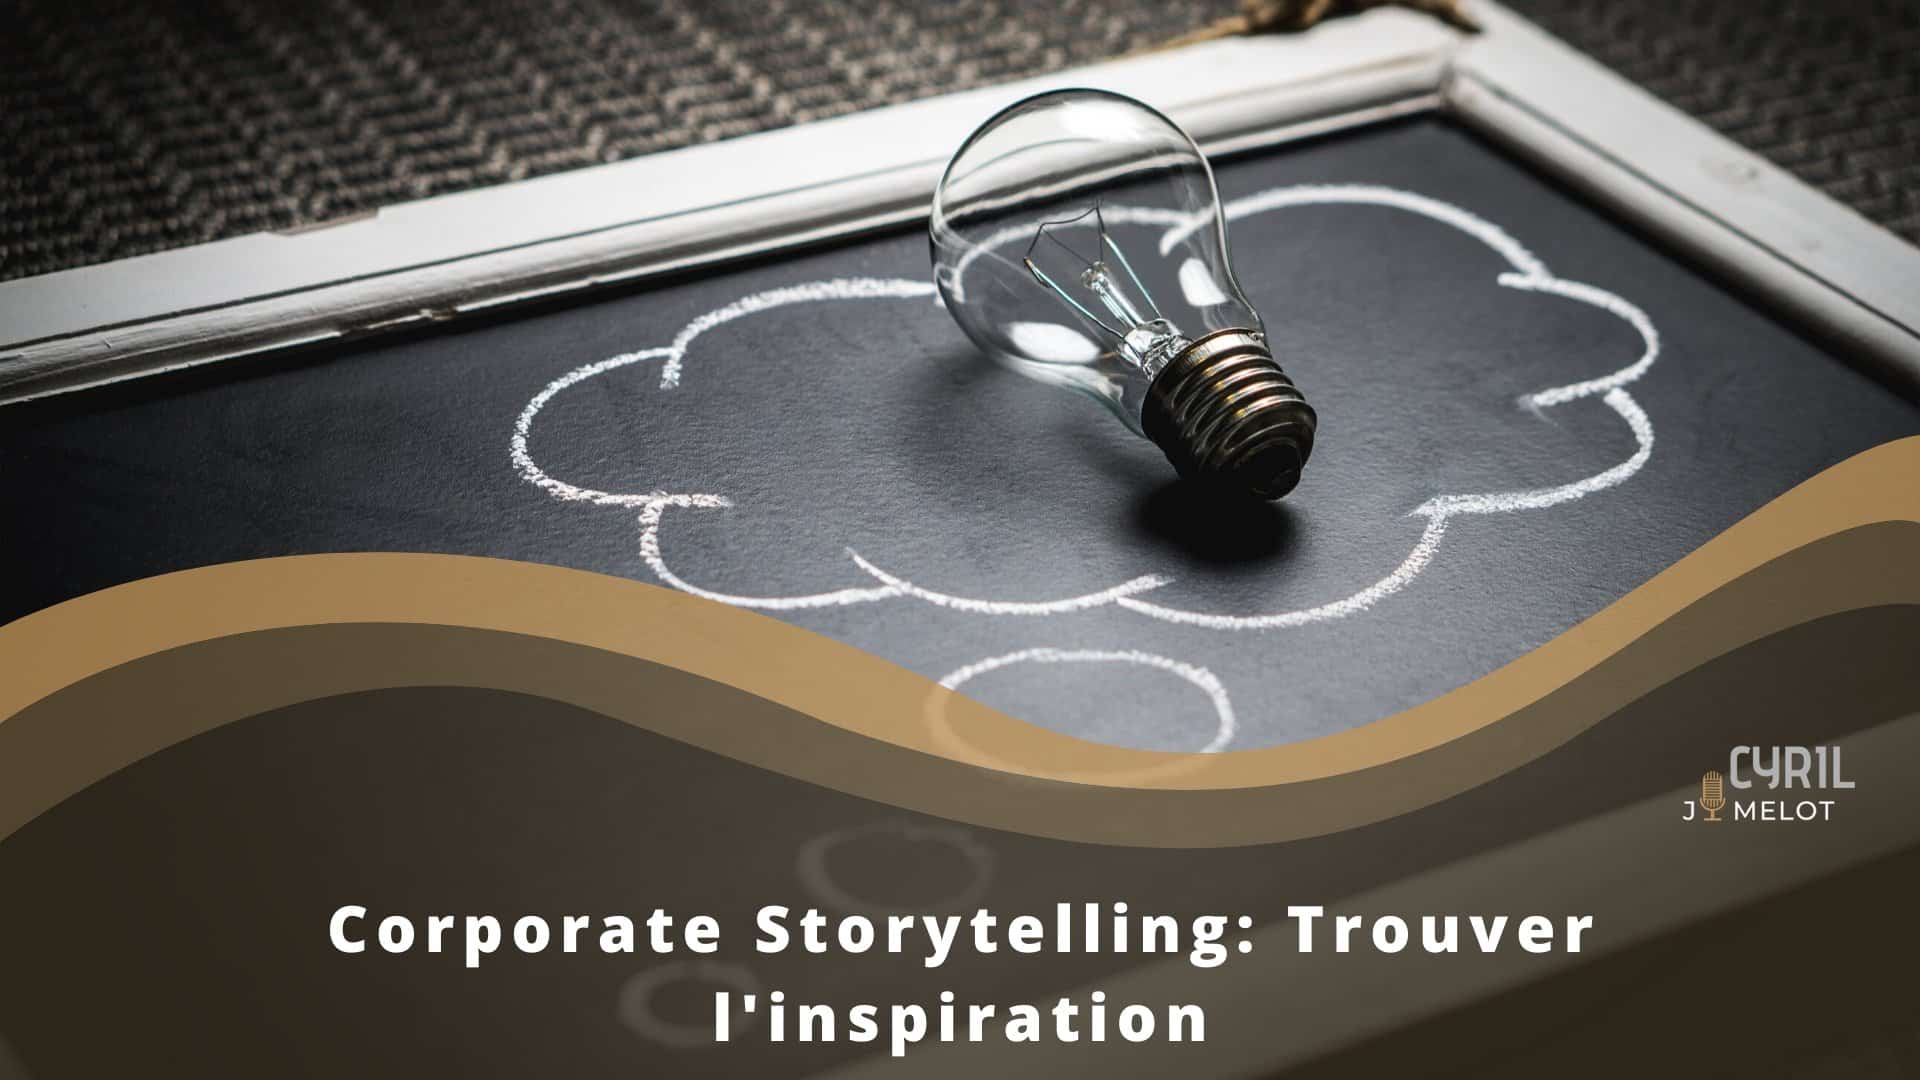 Corporate Storytelling: Trouver l’inspiration